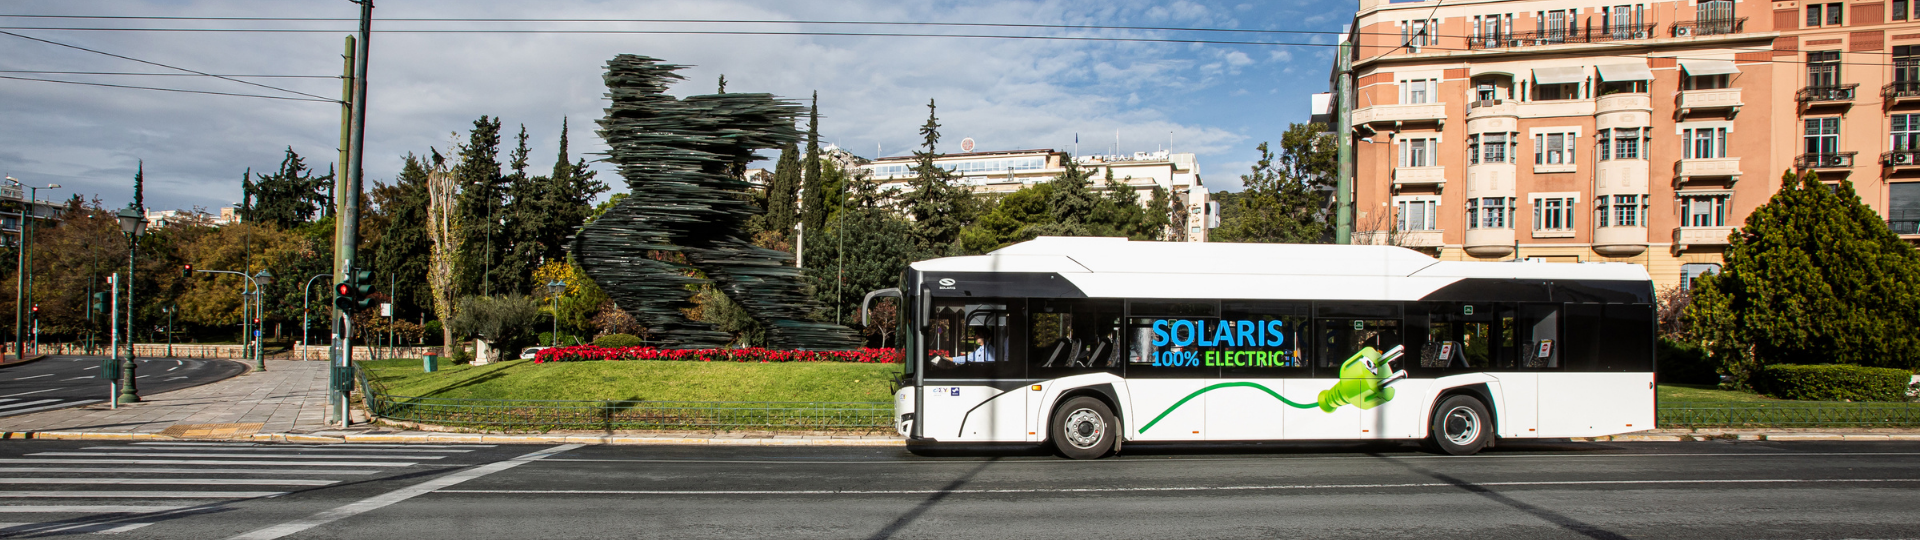 Electric buses to debut in Zduńska Wola